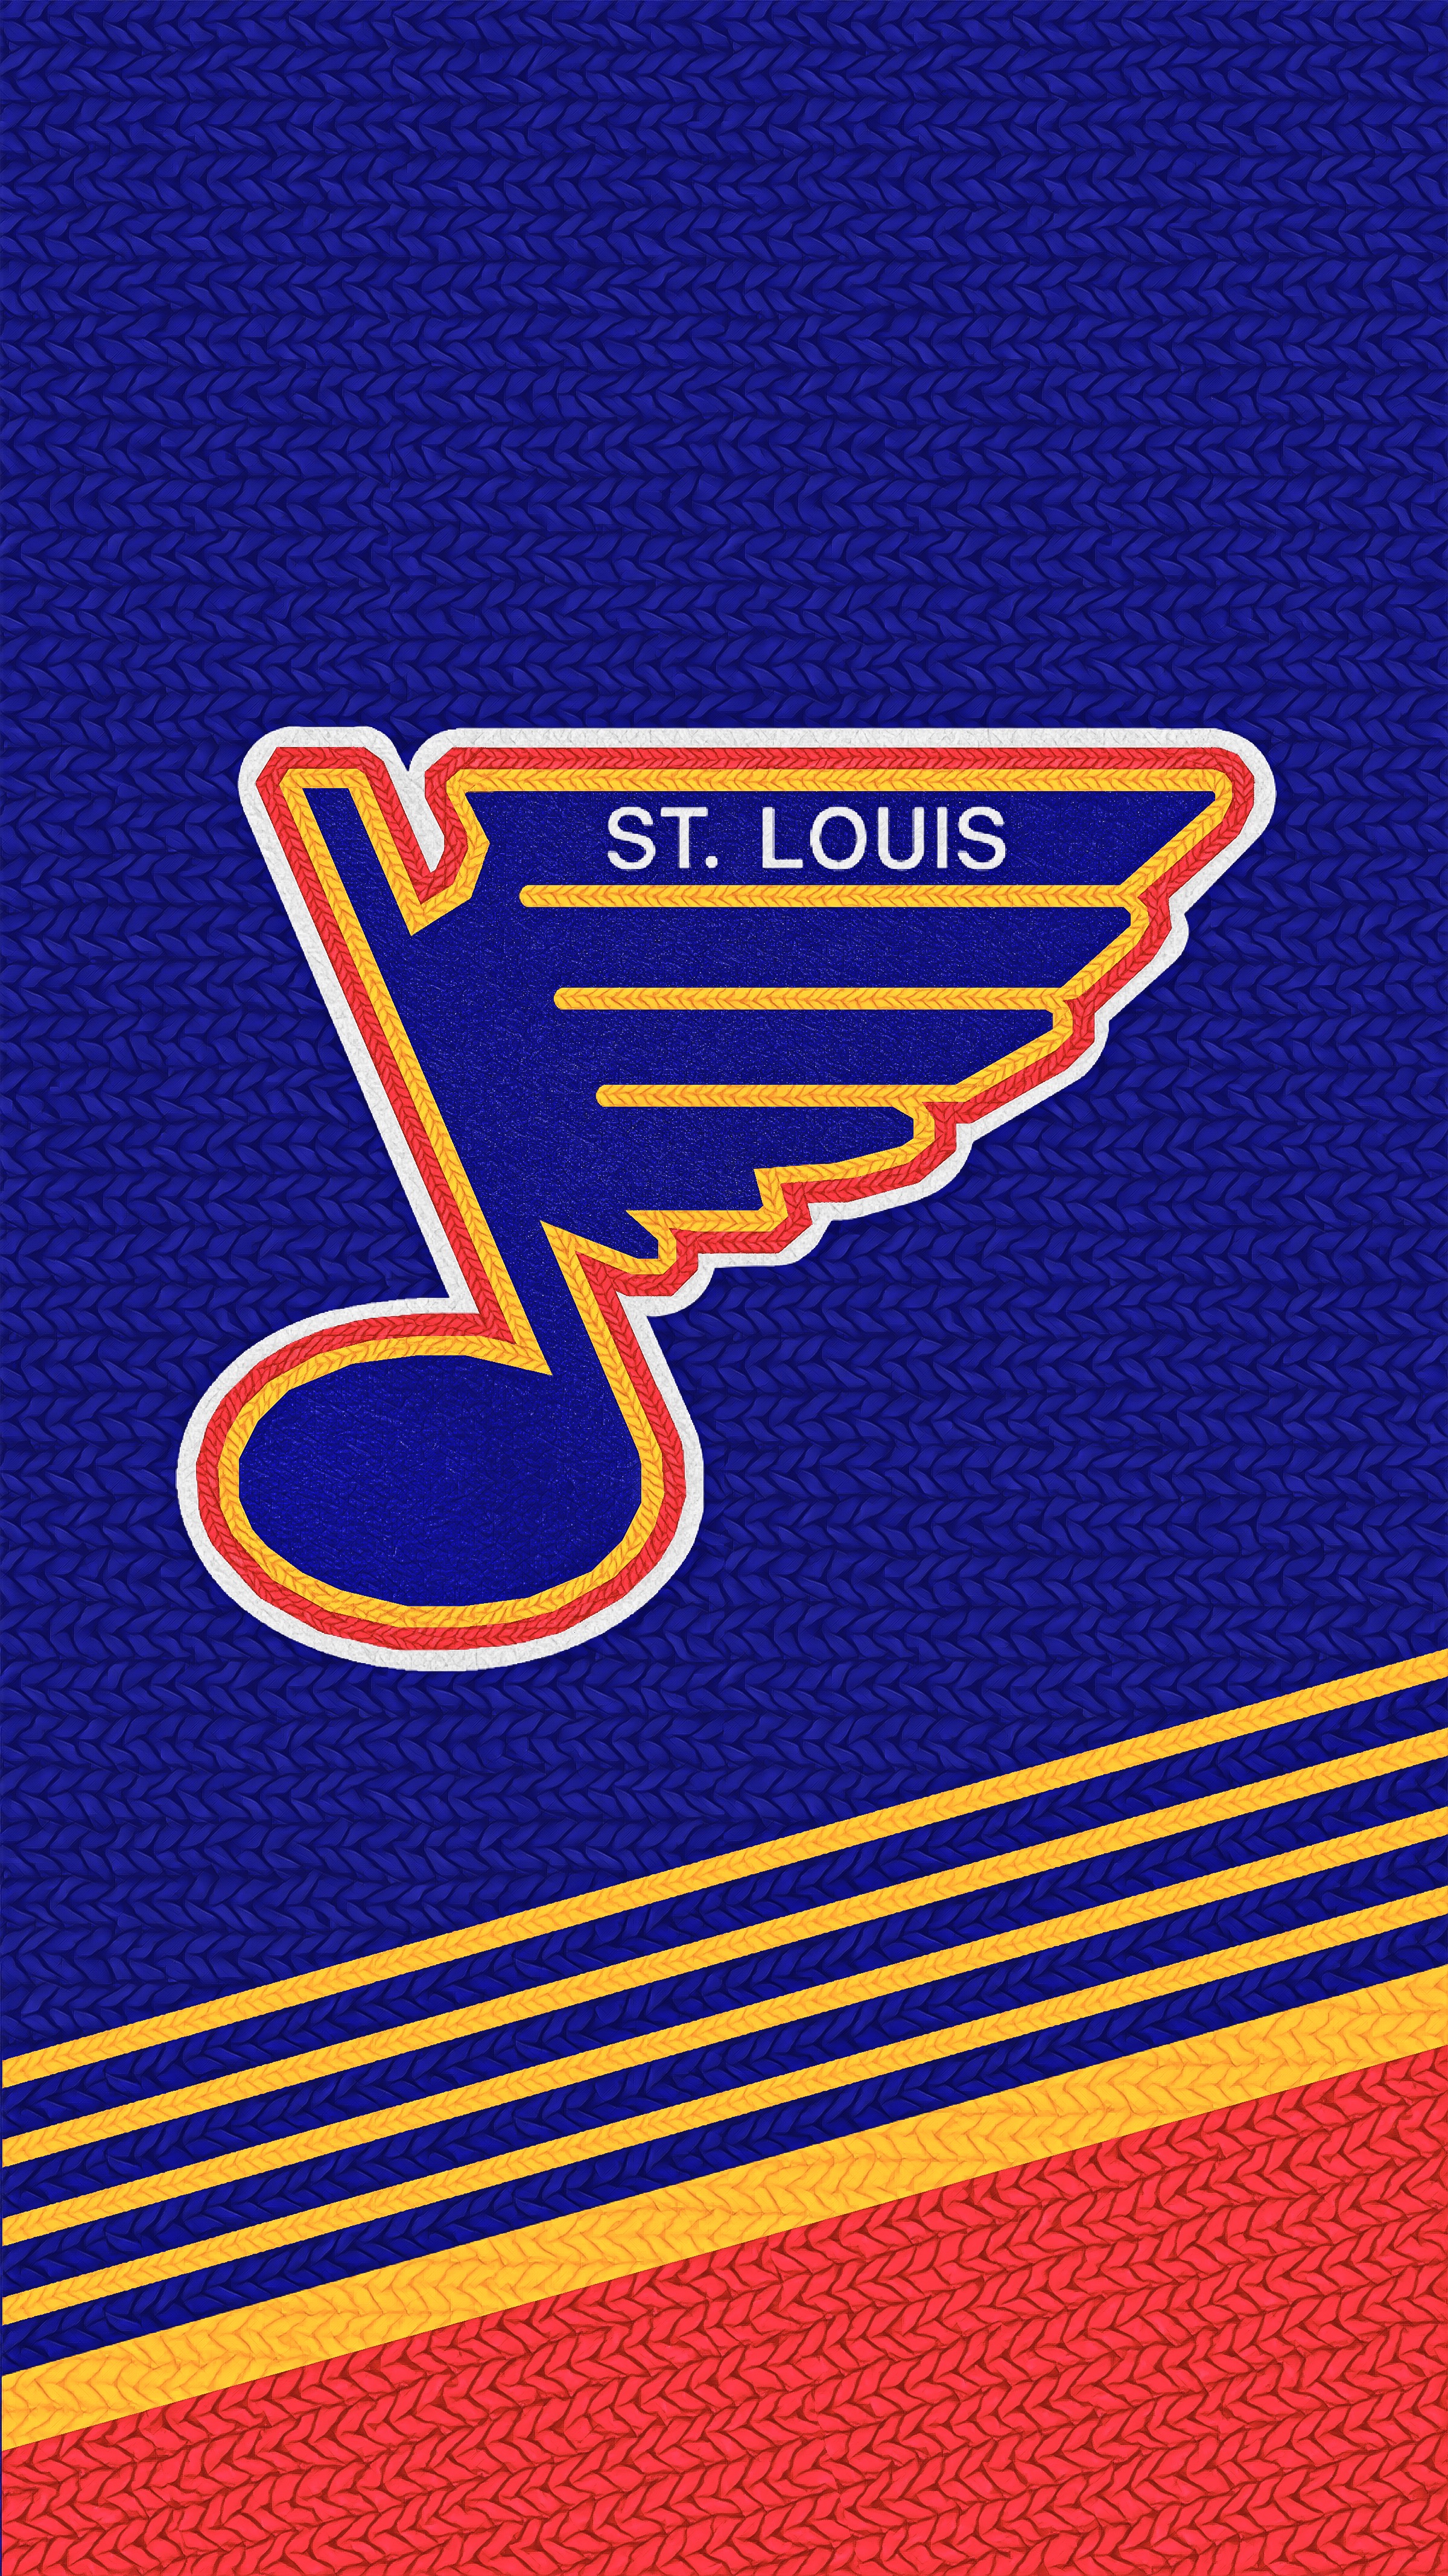 As a blackhawks fan, I hate how much I love these beautiful jerseys. Enjoy  some mobile wallpapers, blues fans. (check my comment for the blue &  reverse retro versions) : r/stlouisblues